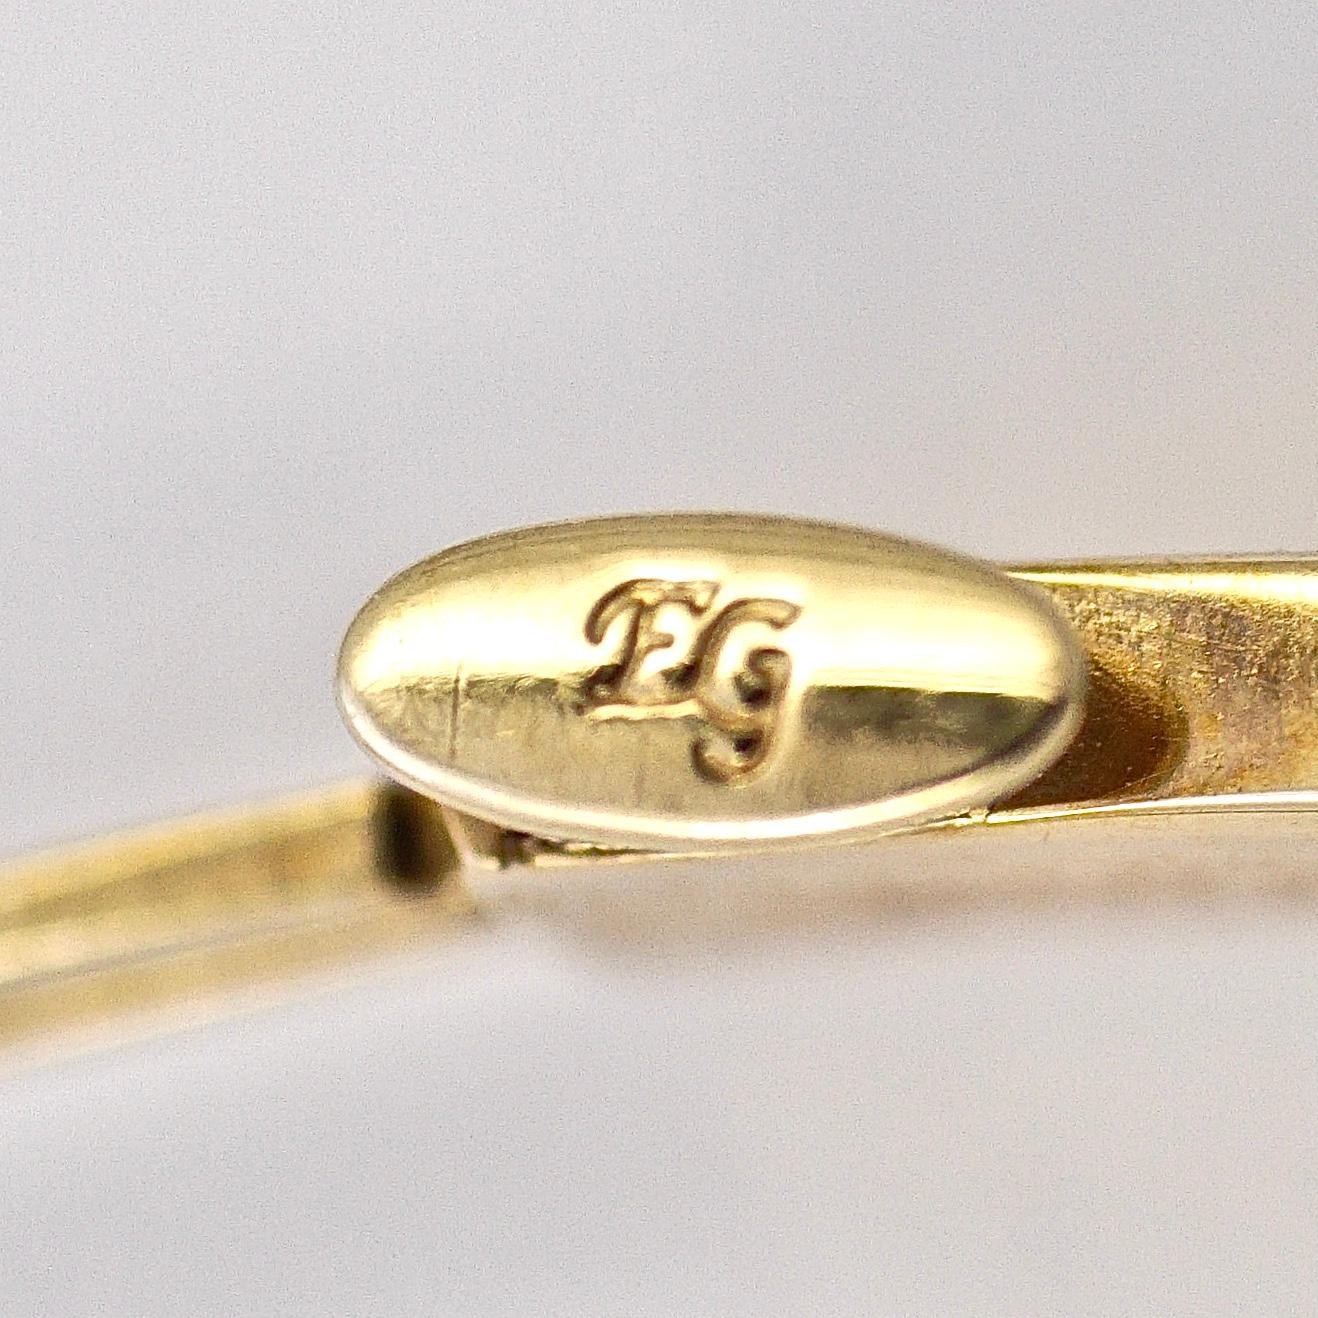 EternaGold 14K Gold Textured Leaf Design Bangle, Costa Rica In Good Condition For Sale In London, GB